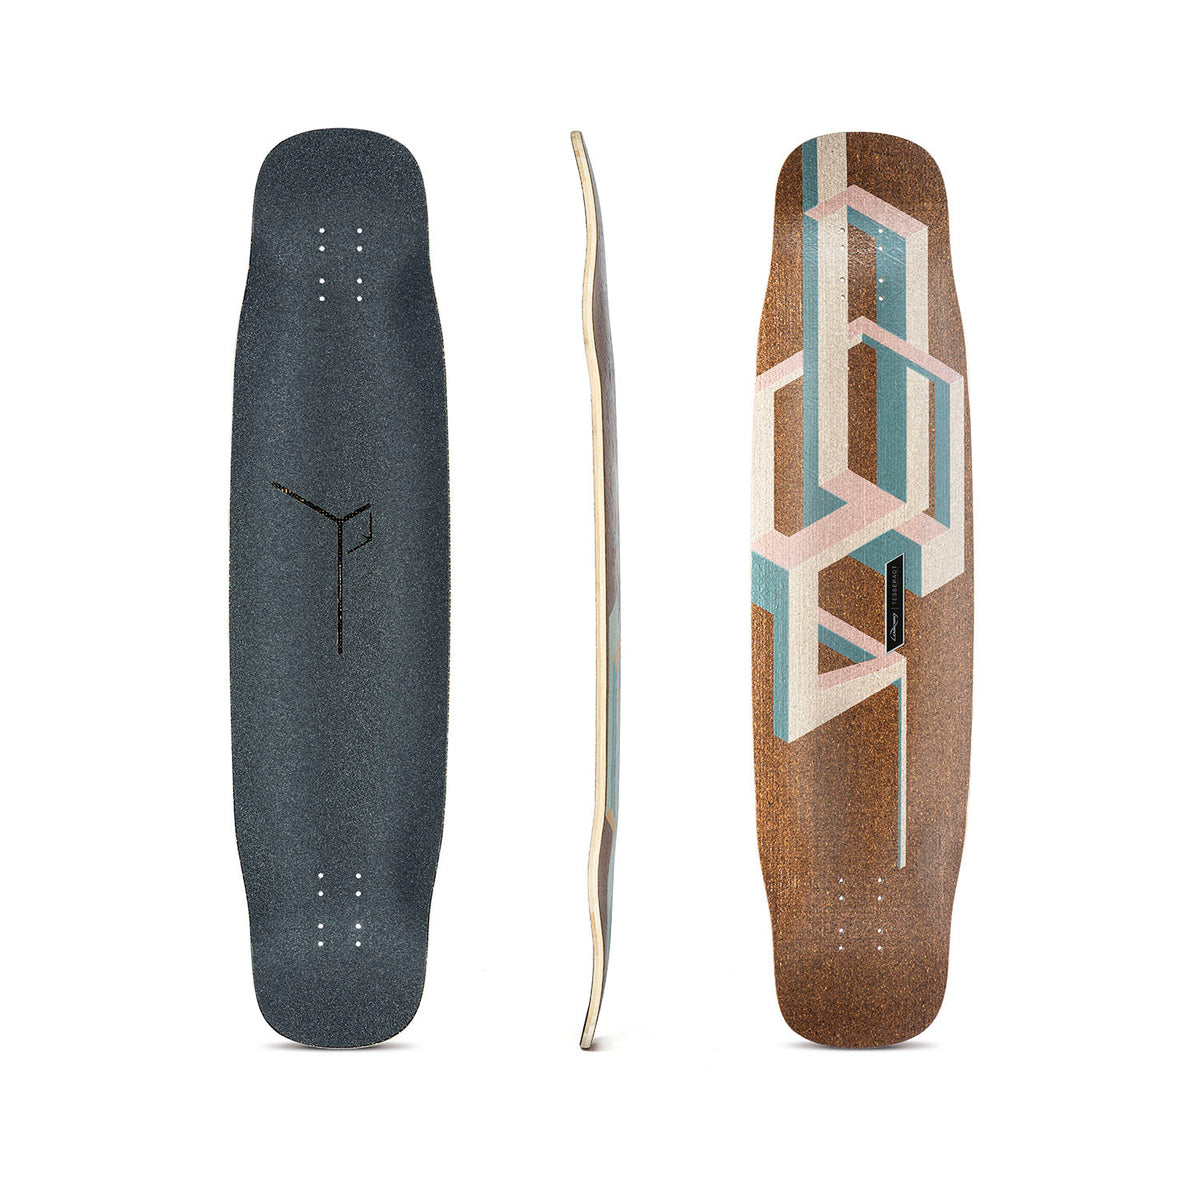 Loaded Basalt Tesseract Longboard, Deck and Complete